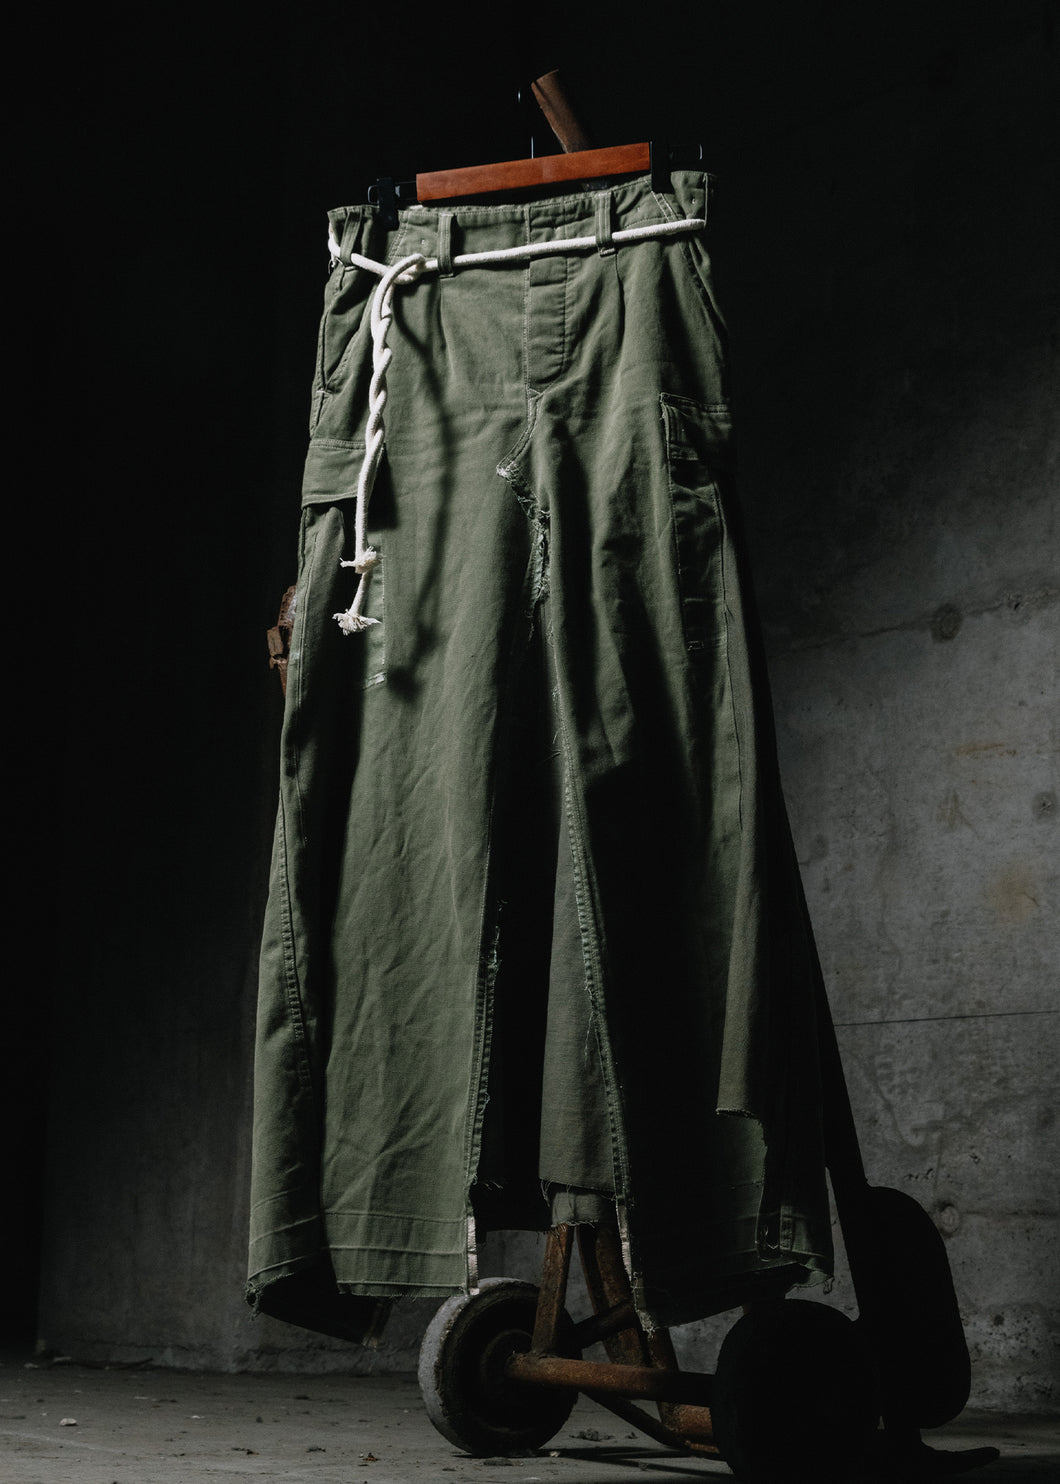 Footloose Tycoon X Random effect - Remade Dress Fabric Form German Army Pant